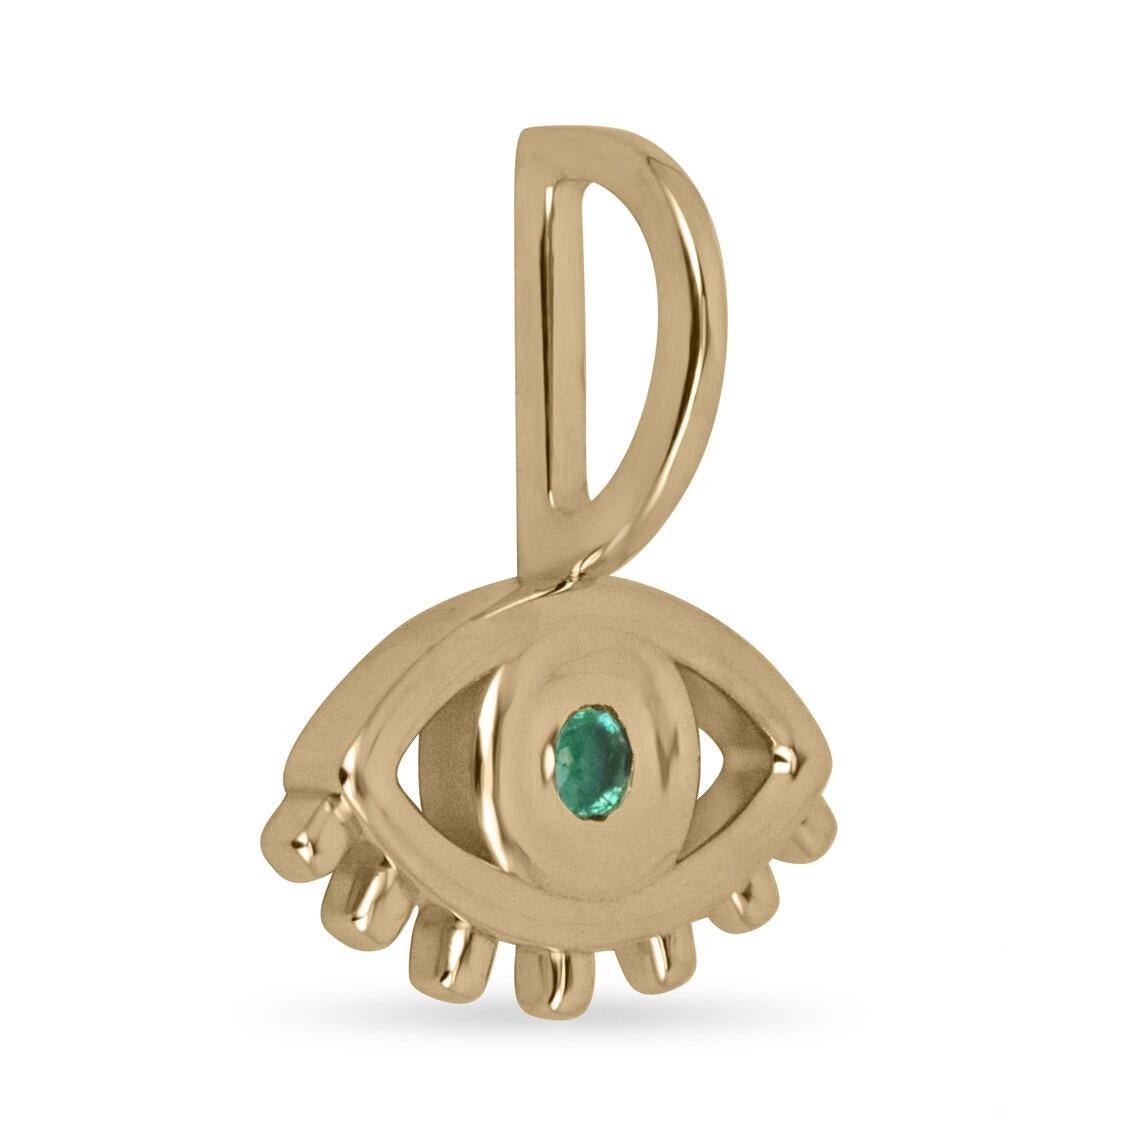 A gorgeous and dainty evil eye emerald pendant. This beautiful piece features a petite natural round cut emerald in the very center of the eye. The evil eye has been used throughout the centuries to ward off curses or malicious intent. Many believed